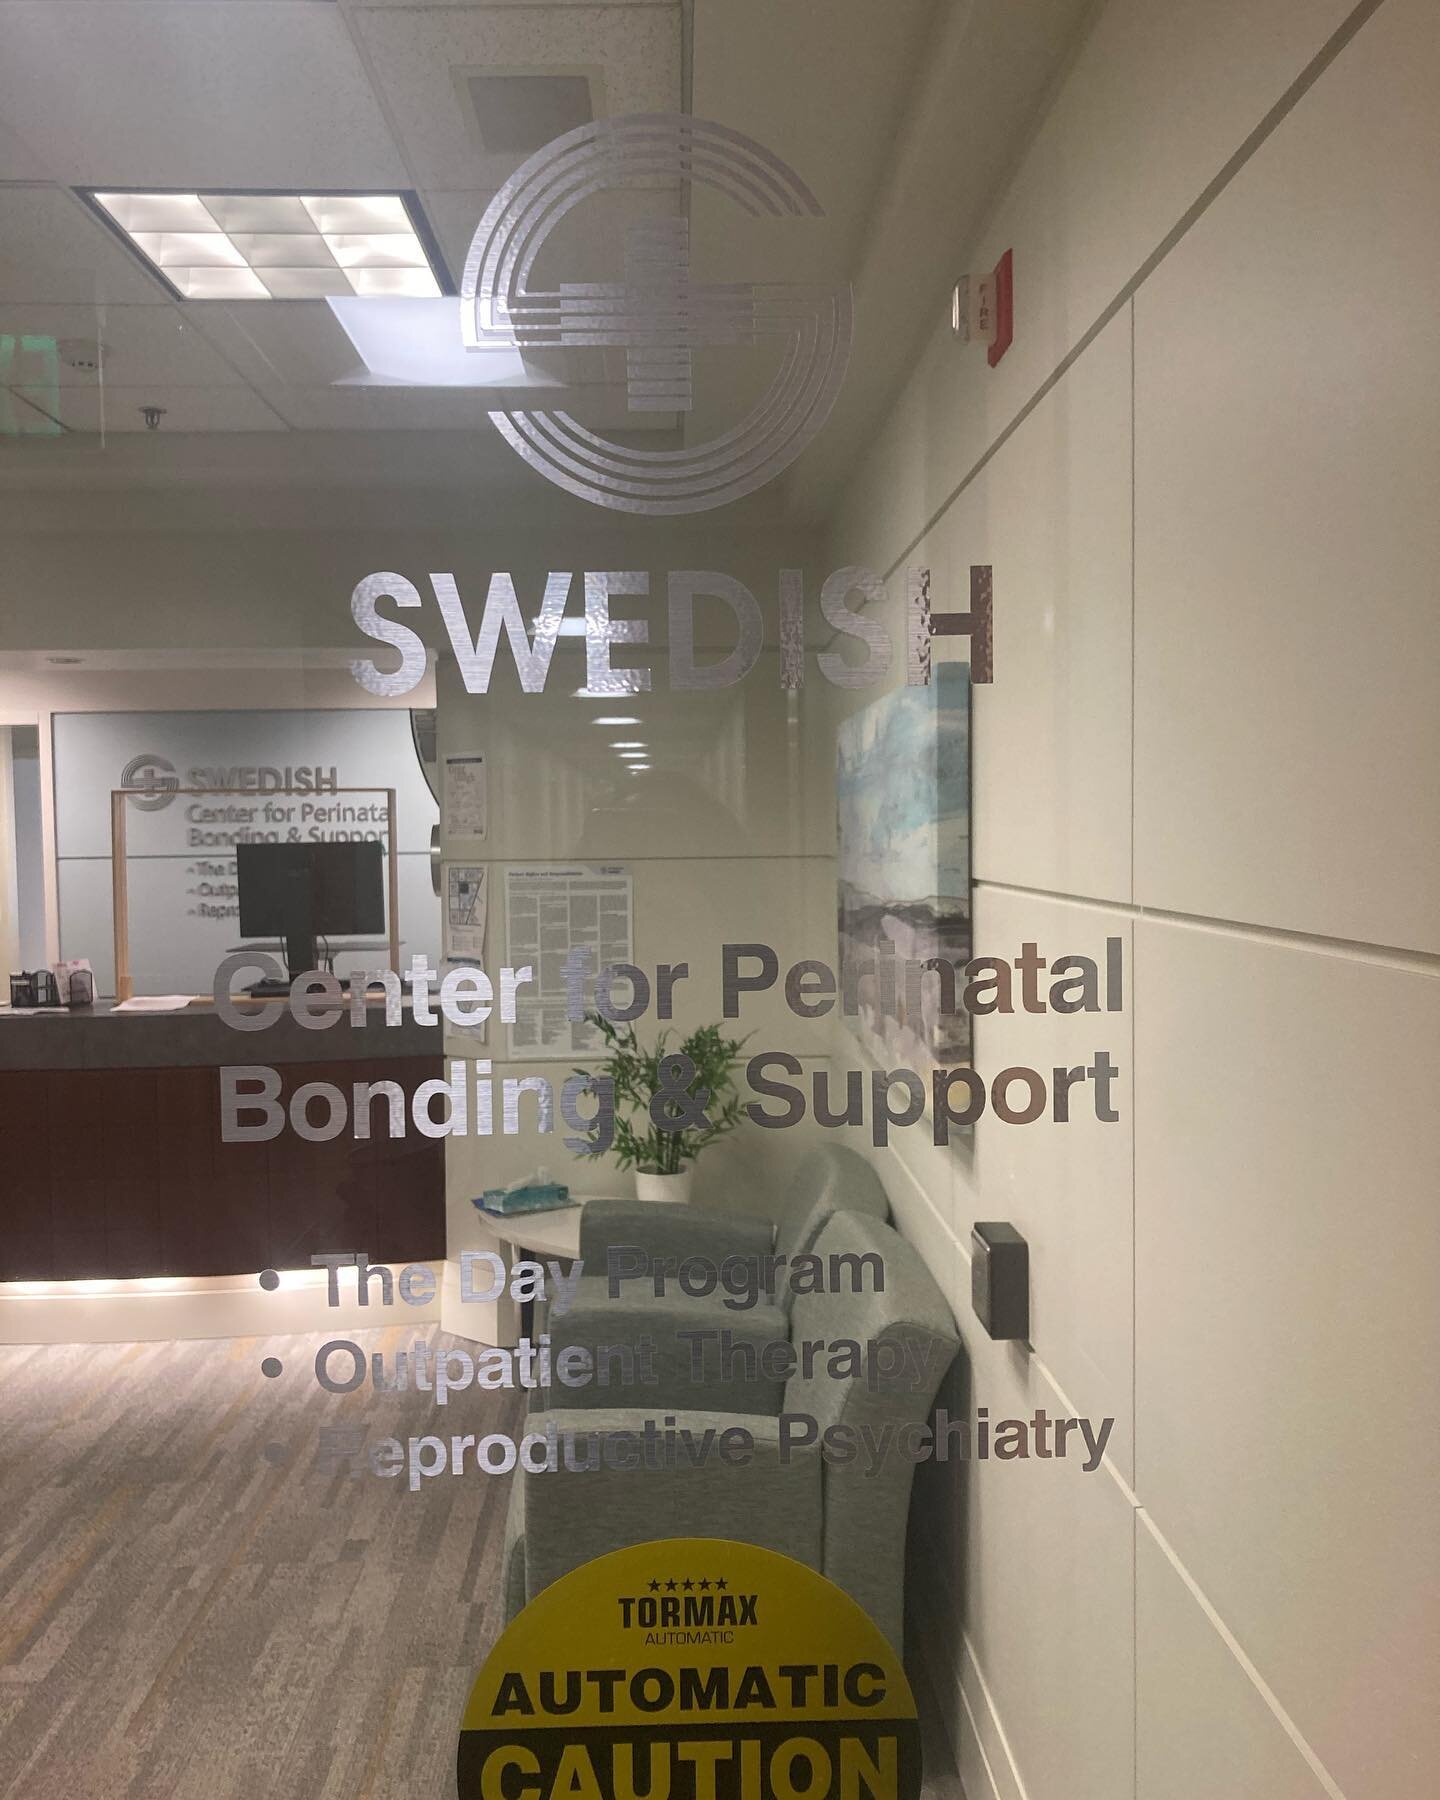 Image description: a glass door with the words Swedish Center for Perinatal Bonding and Support.  I am so excited to be joining the team at this amazing, whole-person focused center for birthing parents experiencing Postnatal mental health challenges